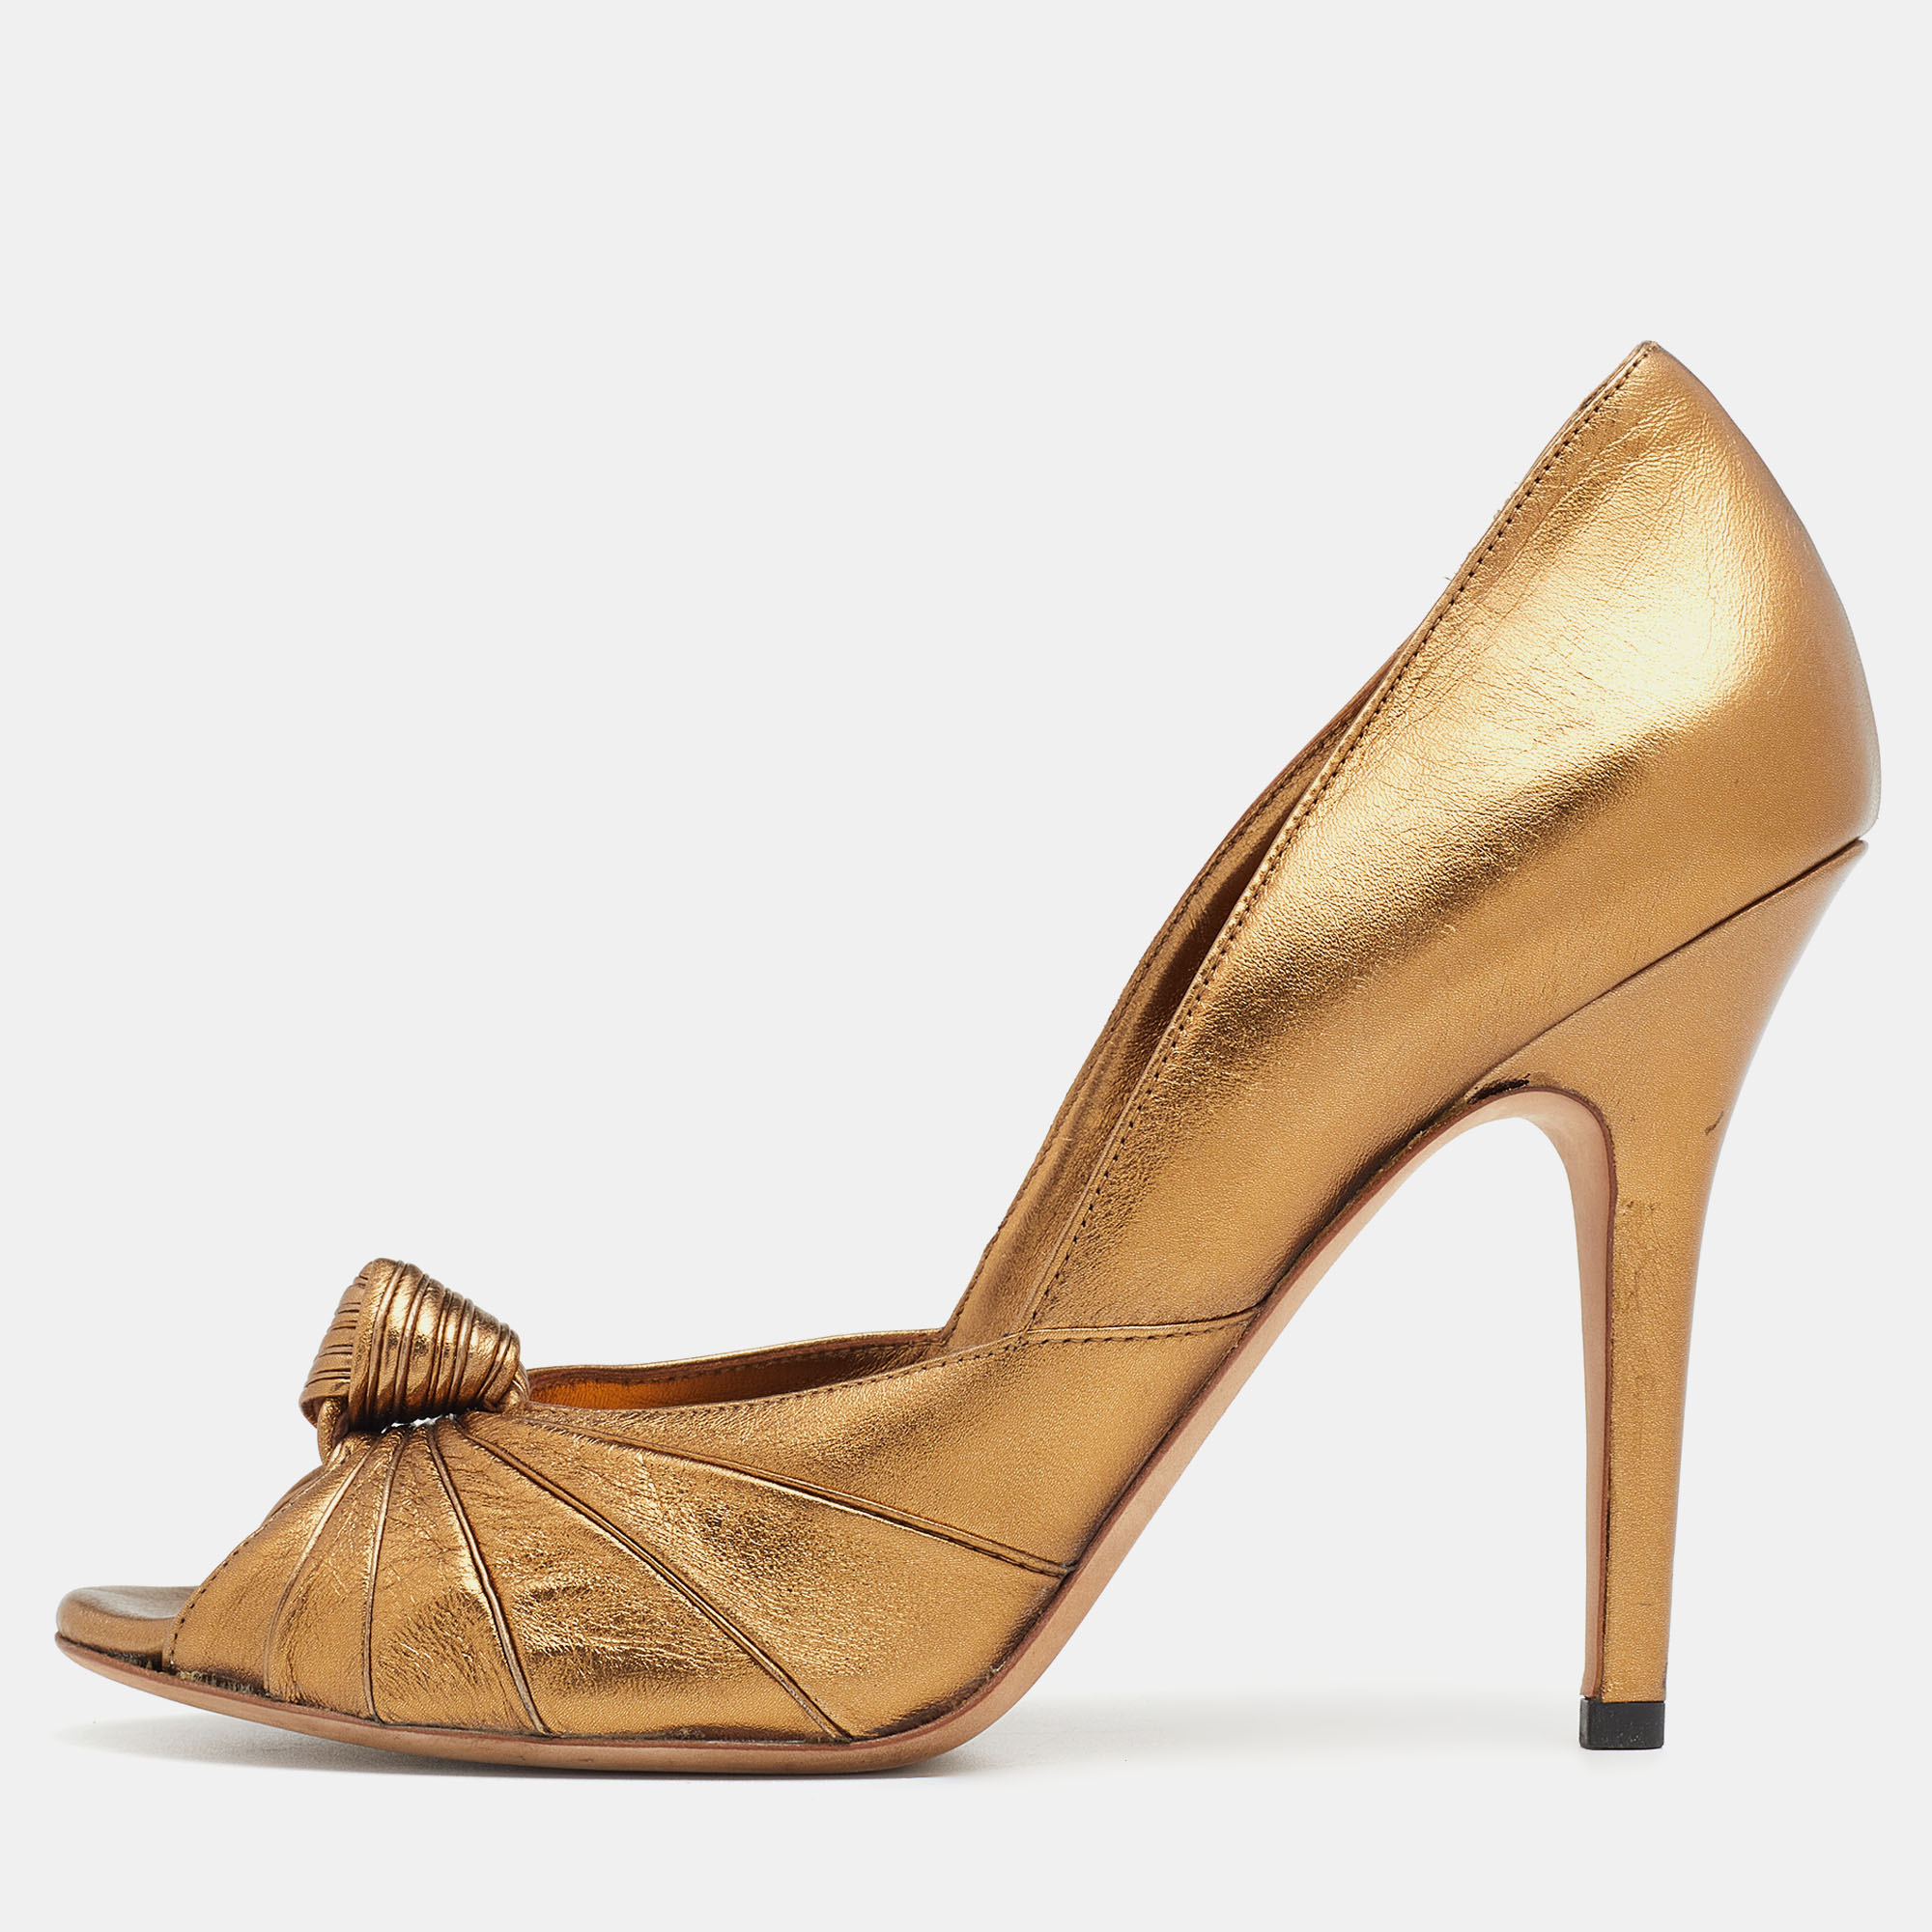 

Gucci Metallic Gold Leather Knotted Peep Toe Pumps Size